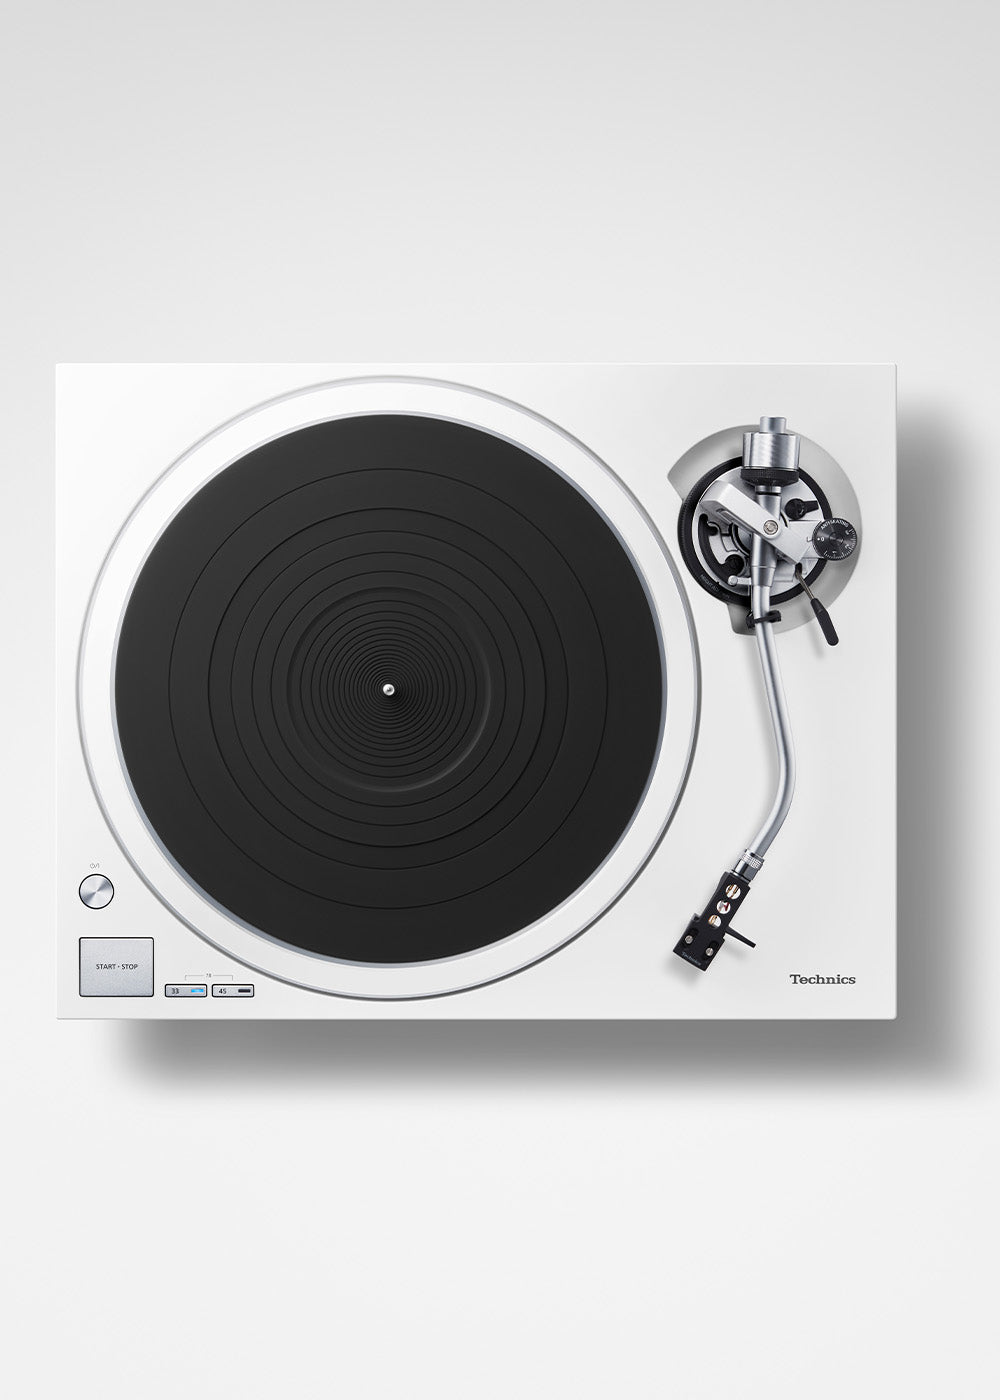 Technics Releases Two New Products for 2023